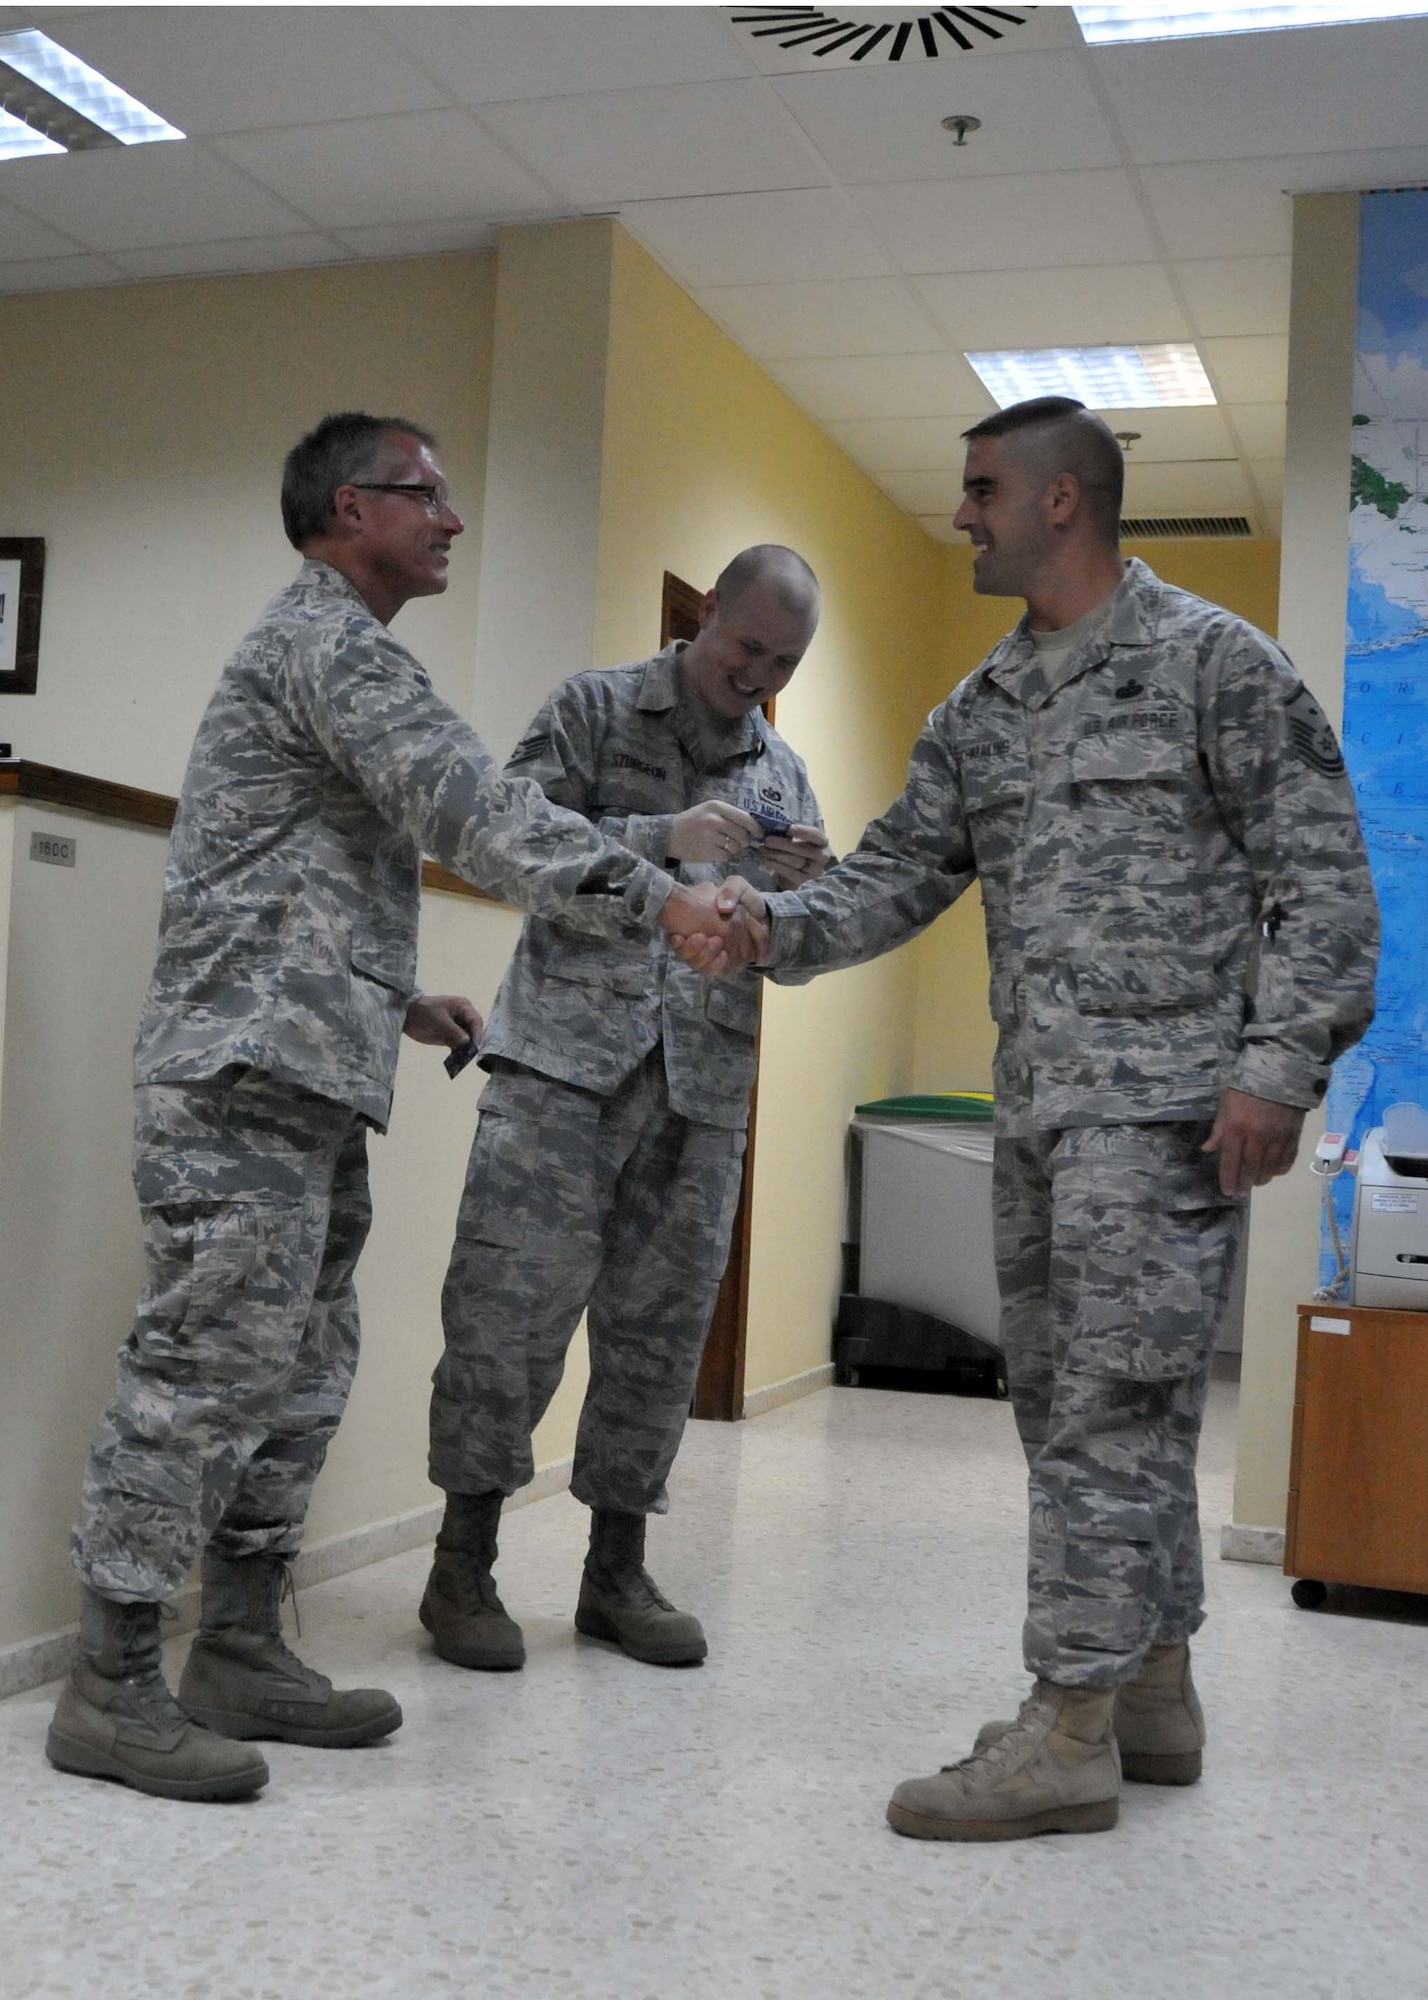 Master Sgt. Mike A. Schmaling, First Sergeant, 313th Air Expeditionary Wing, distributes telephone cards supplied by the Unformed Service Organization to Lt. Col. Kevin R. Shomin (left) and Staff. Sgt. Cody Sturgeon (middle) on July 11, 2011 at a base in Western Europe. (U.S. Air Force photo/Capt. John P. Capra)